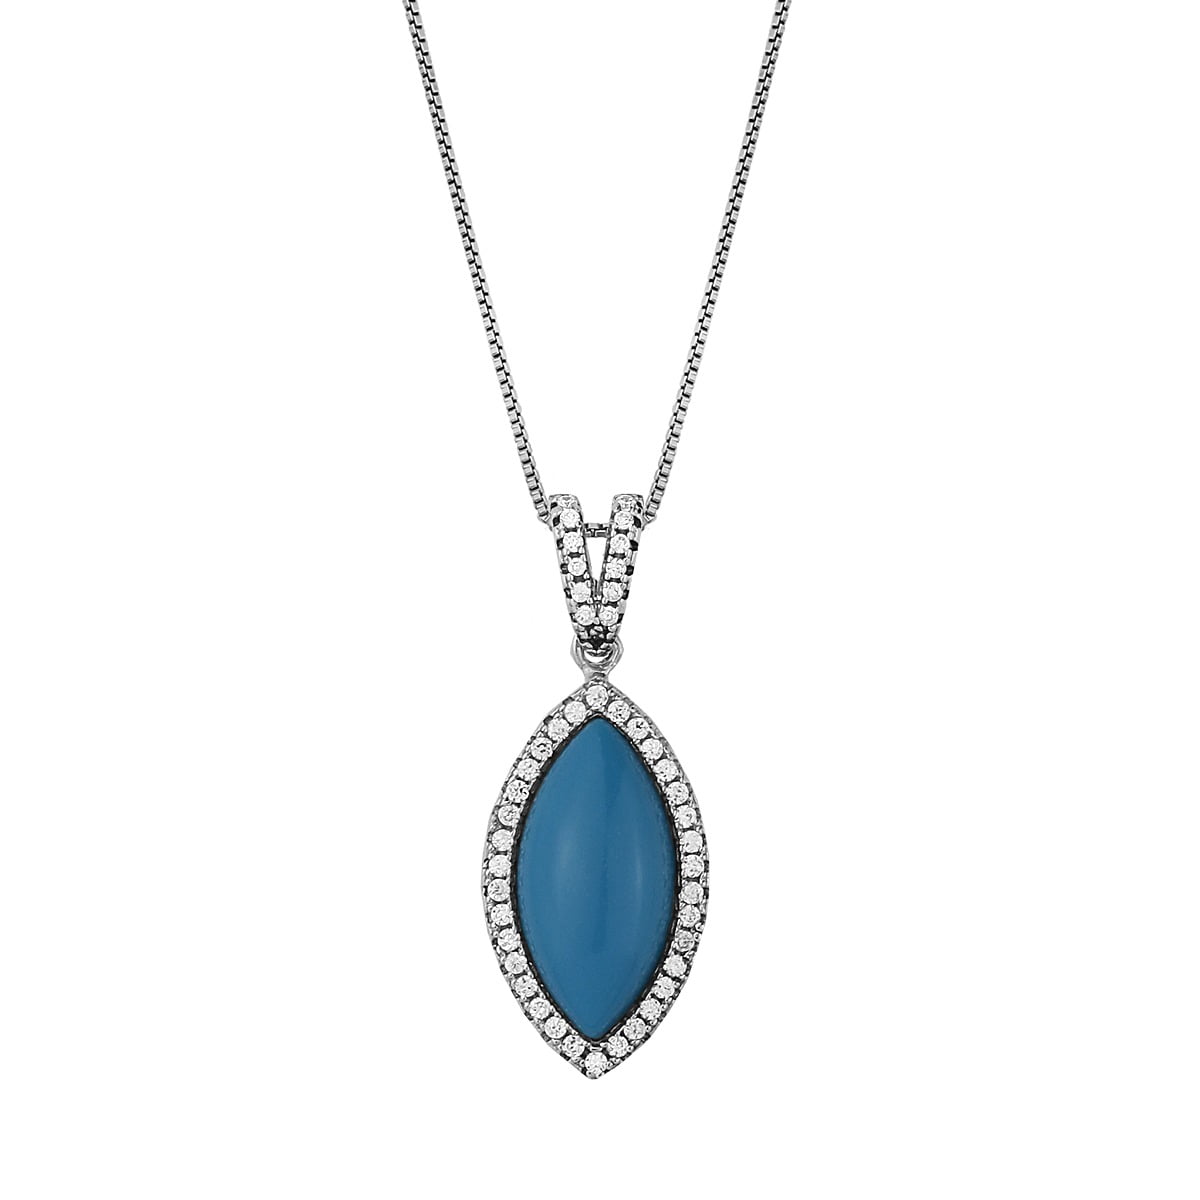 Rosette pendant in marquise shape in sterling silver 925°, with turquoise stone decorated with white zircons.